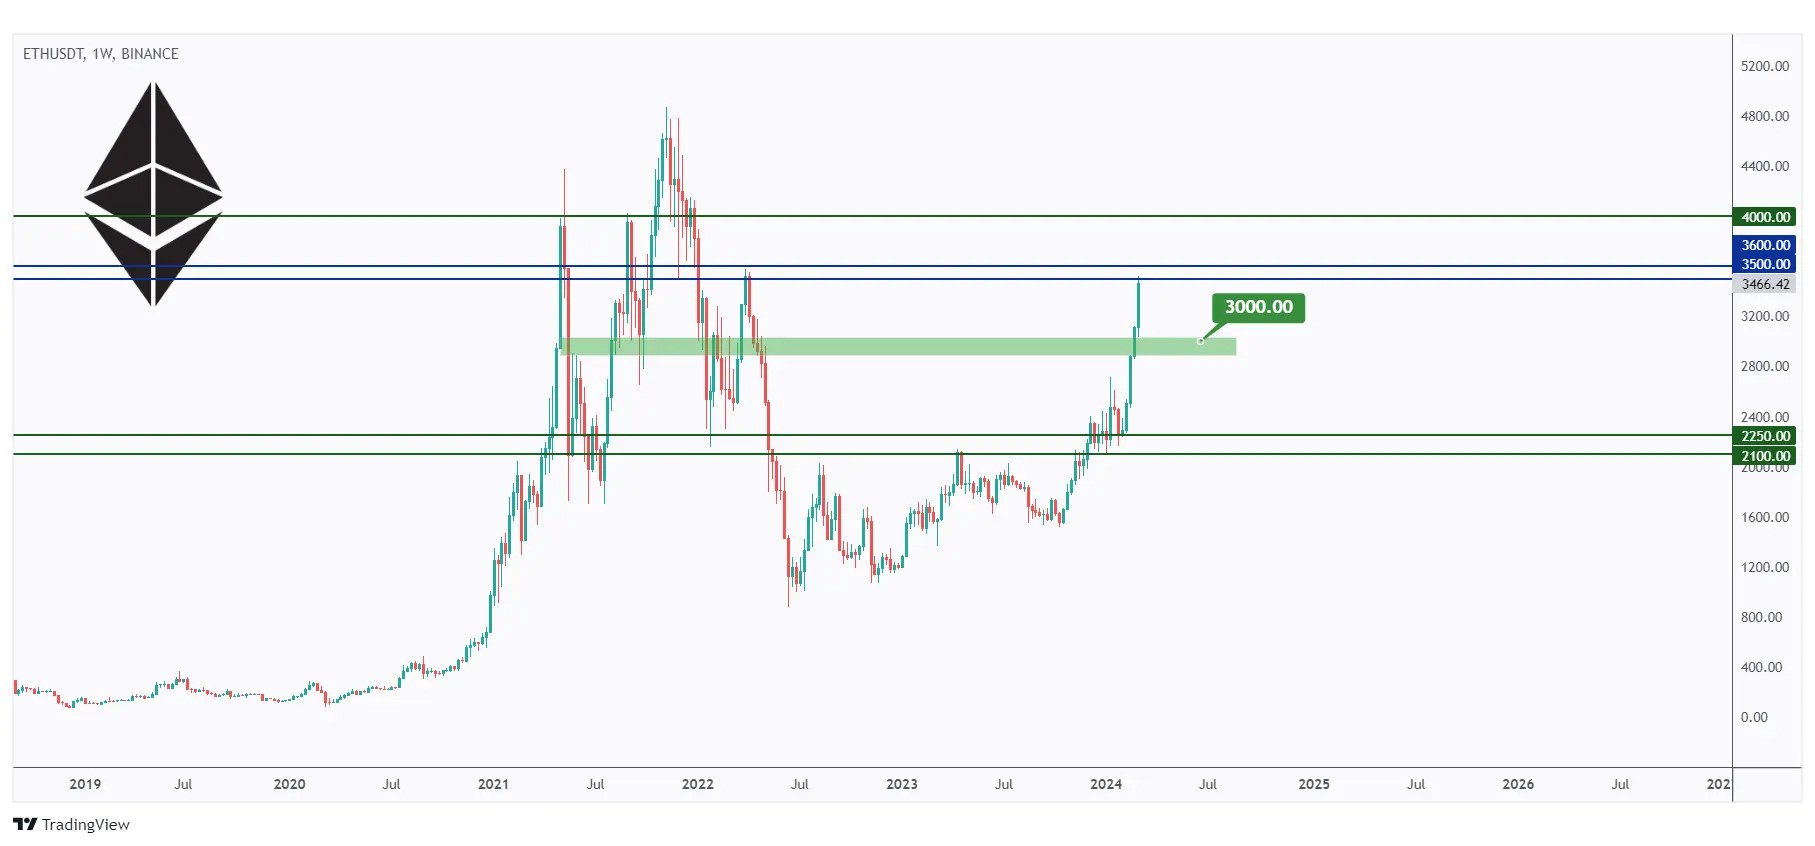 ETH weekly chart approaching a major resistance zone at $3500.